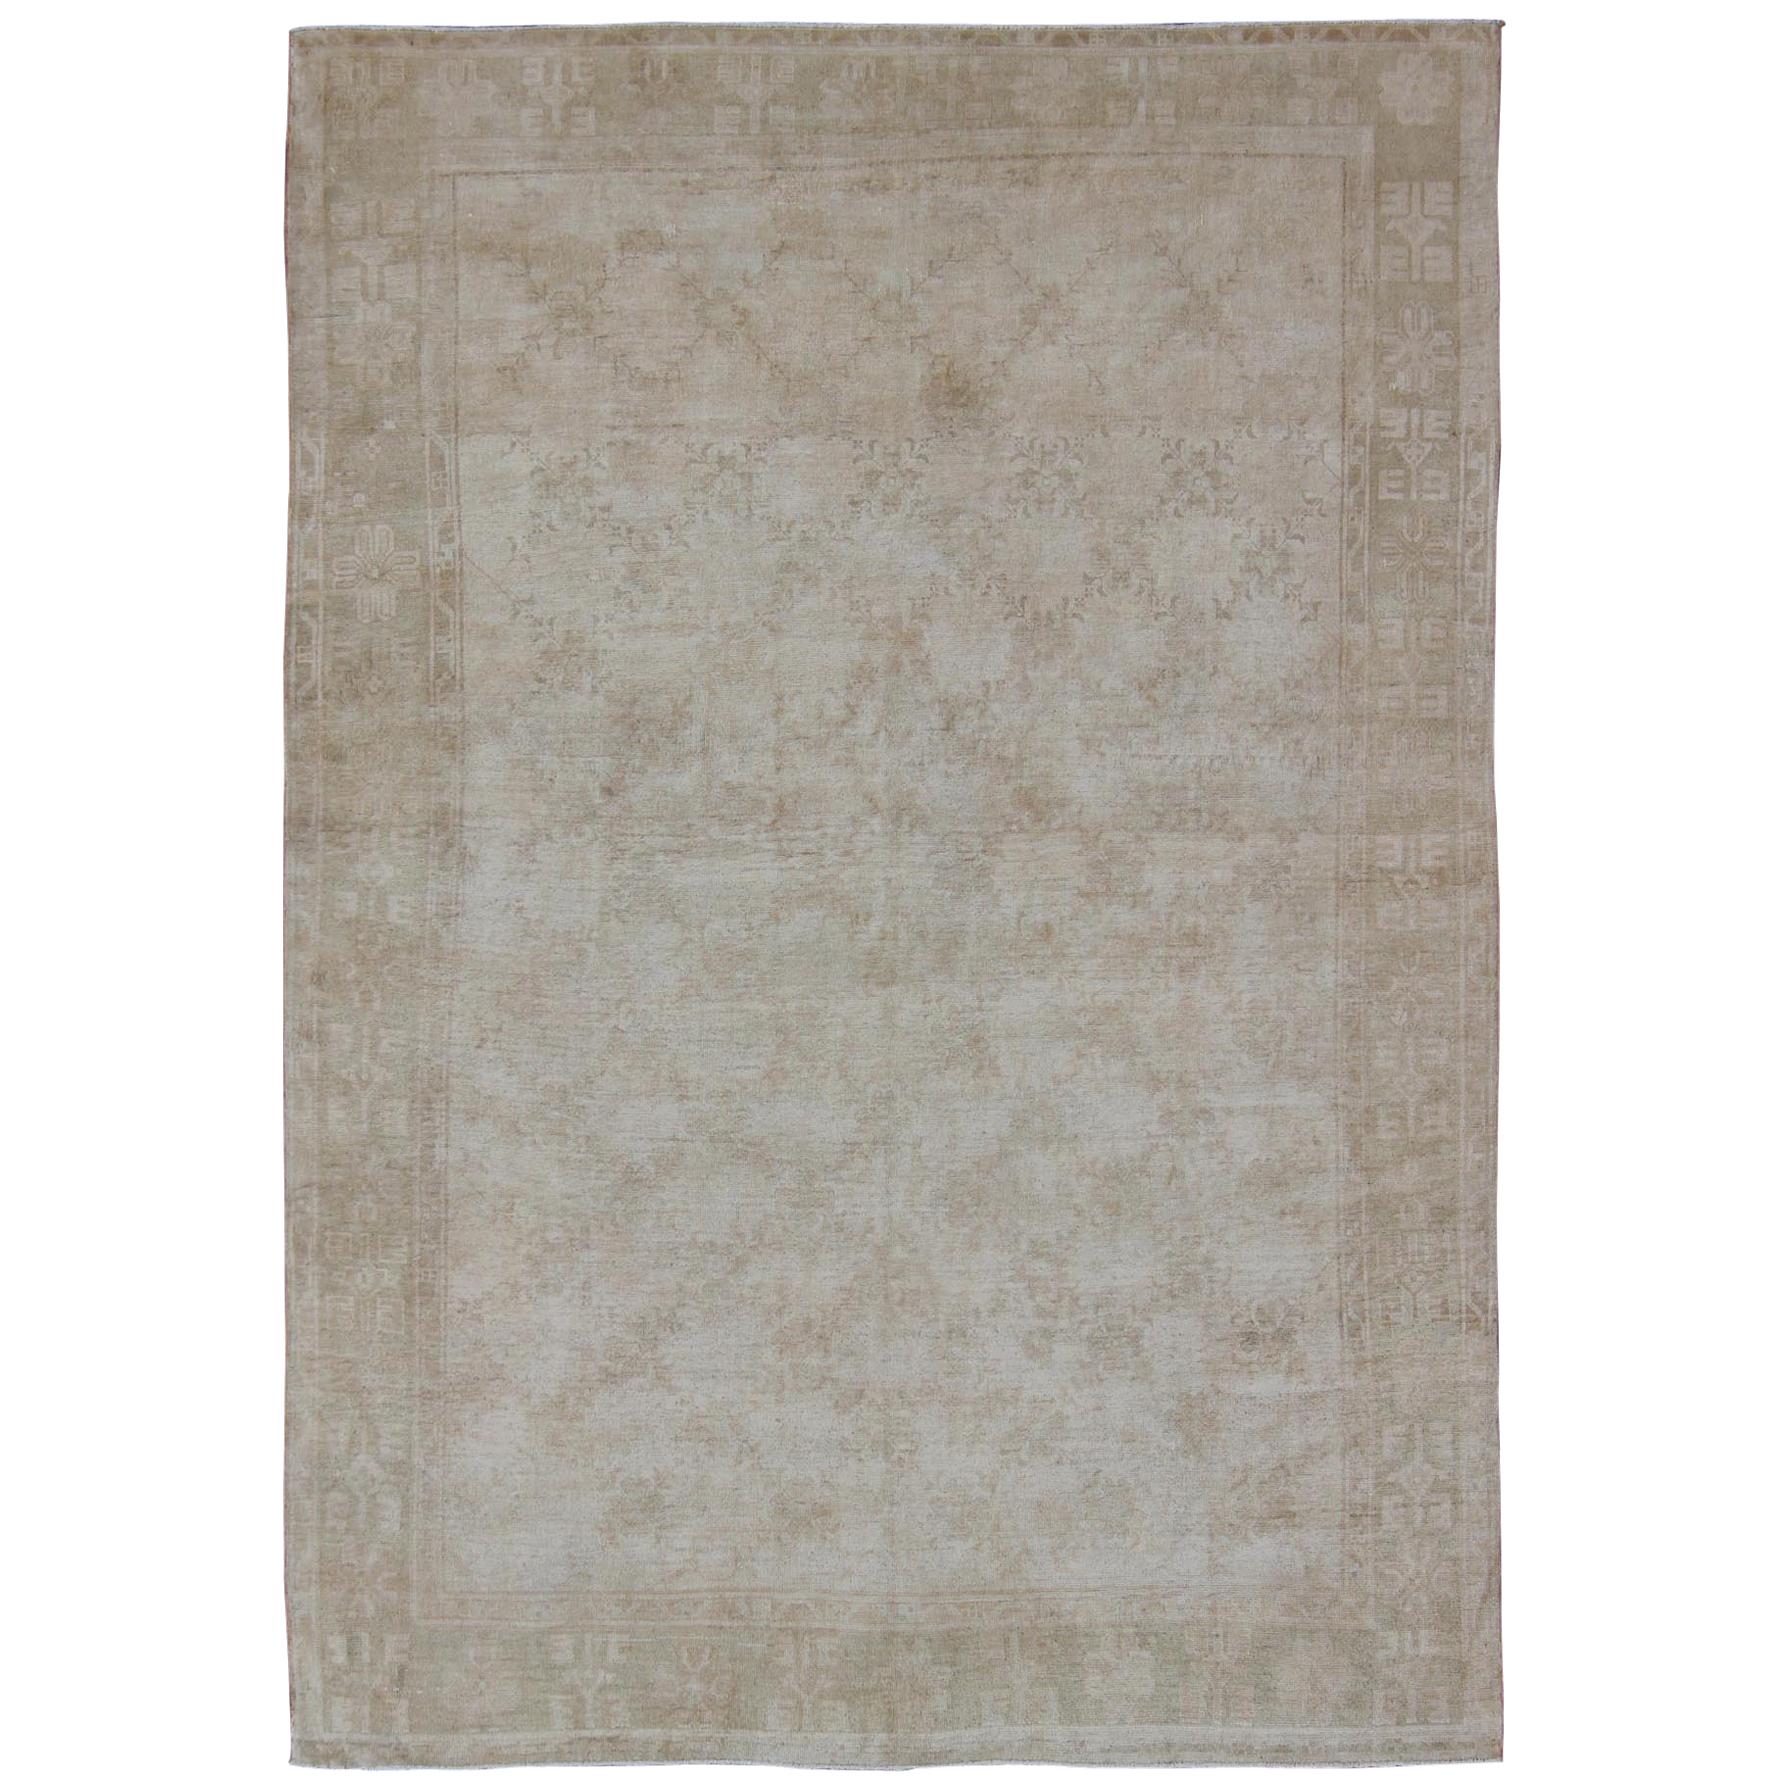 Oushak Rug with Light Color Palette and Repeating Flower Pattern